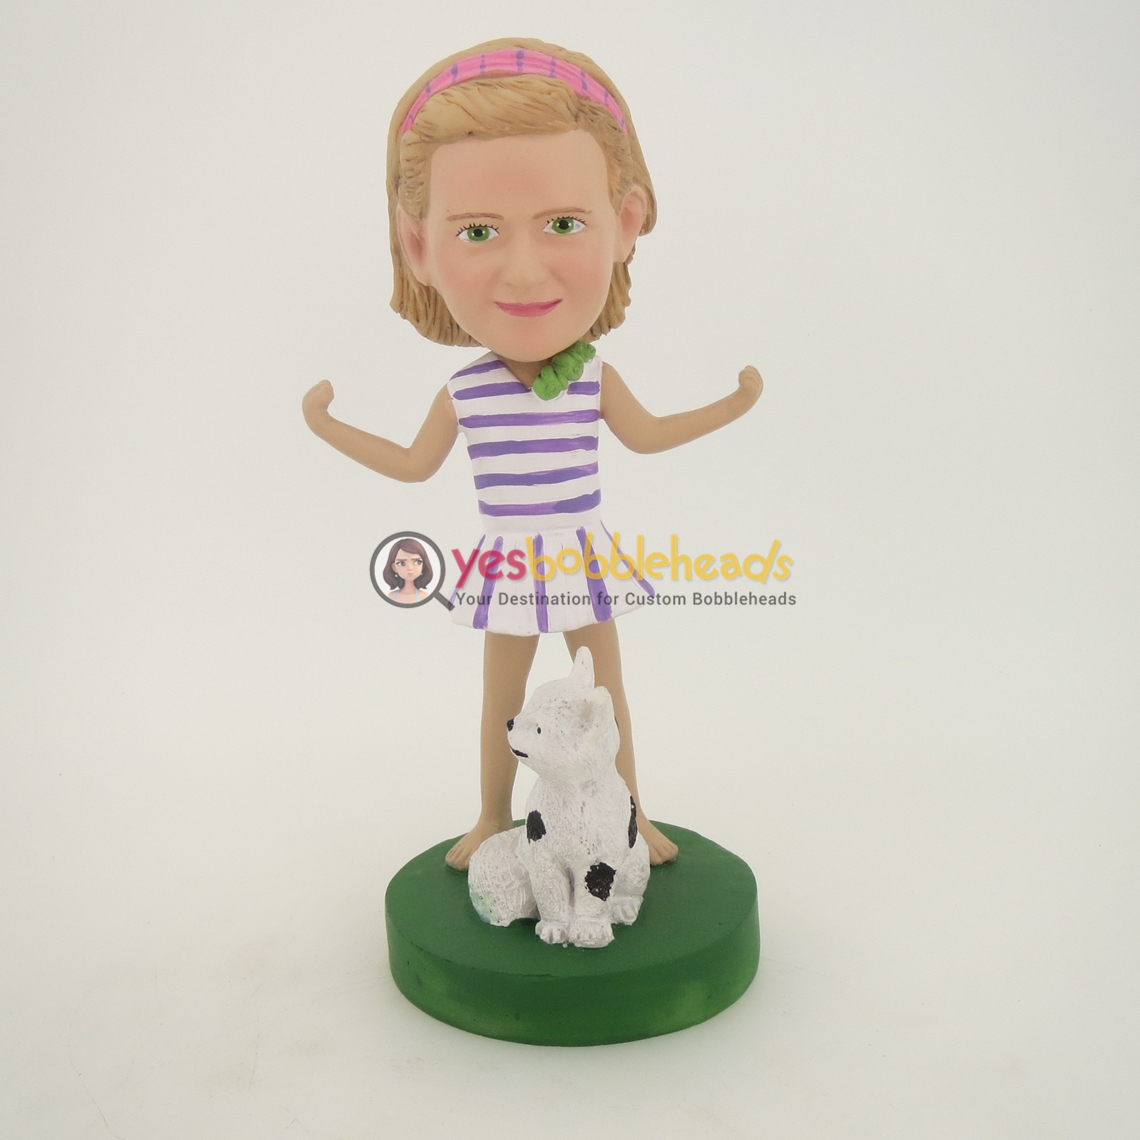 Picture of Custom Bobblehead Doll: Girl And Cat